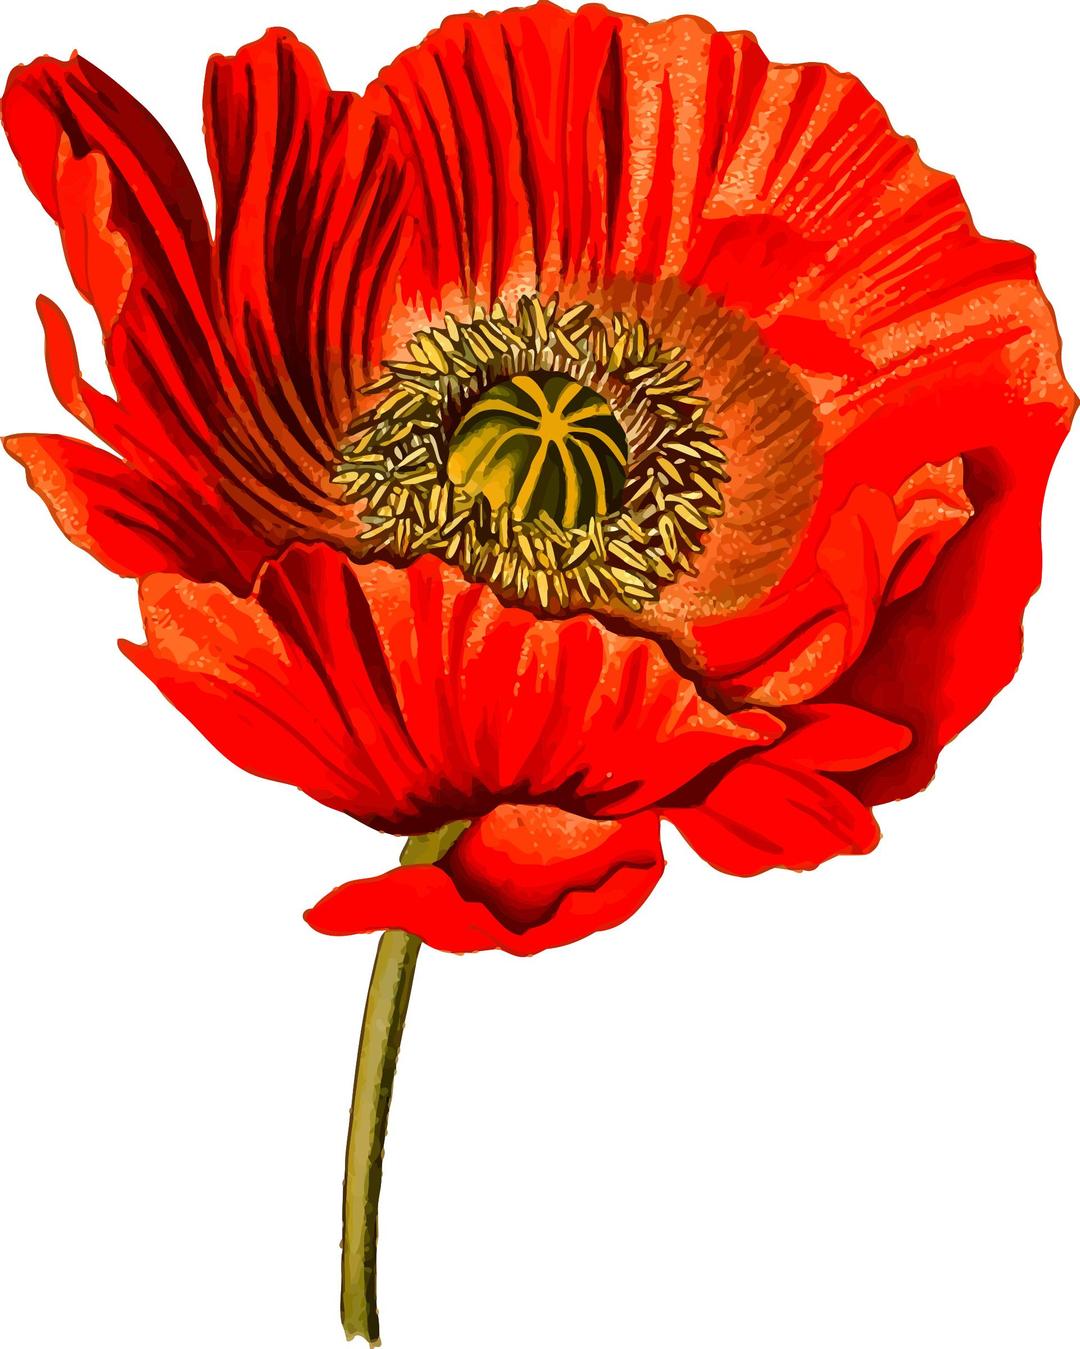 Opium poppy 2 (detailed) png transparent